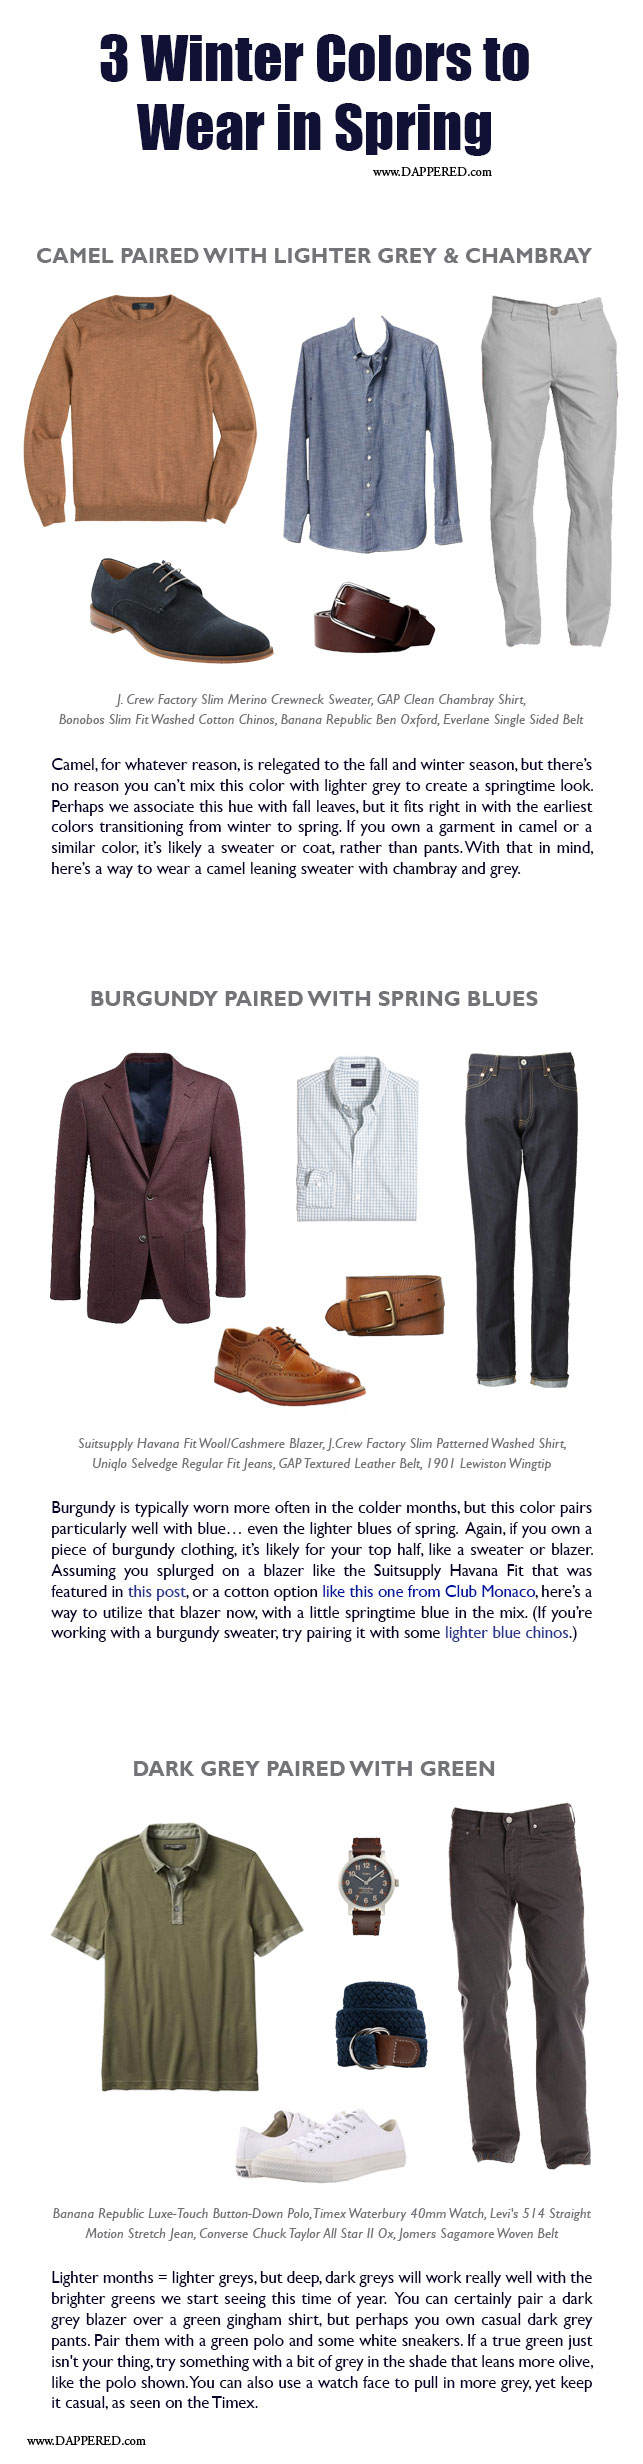 3 Winter Colors to wear in Spring | Dappered.com